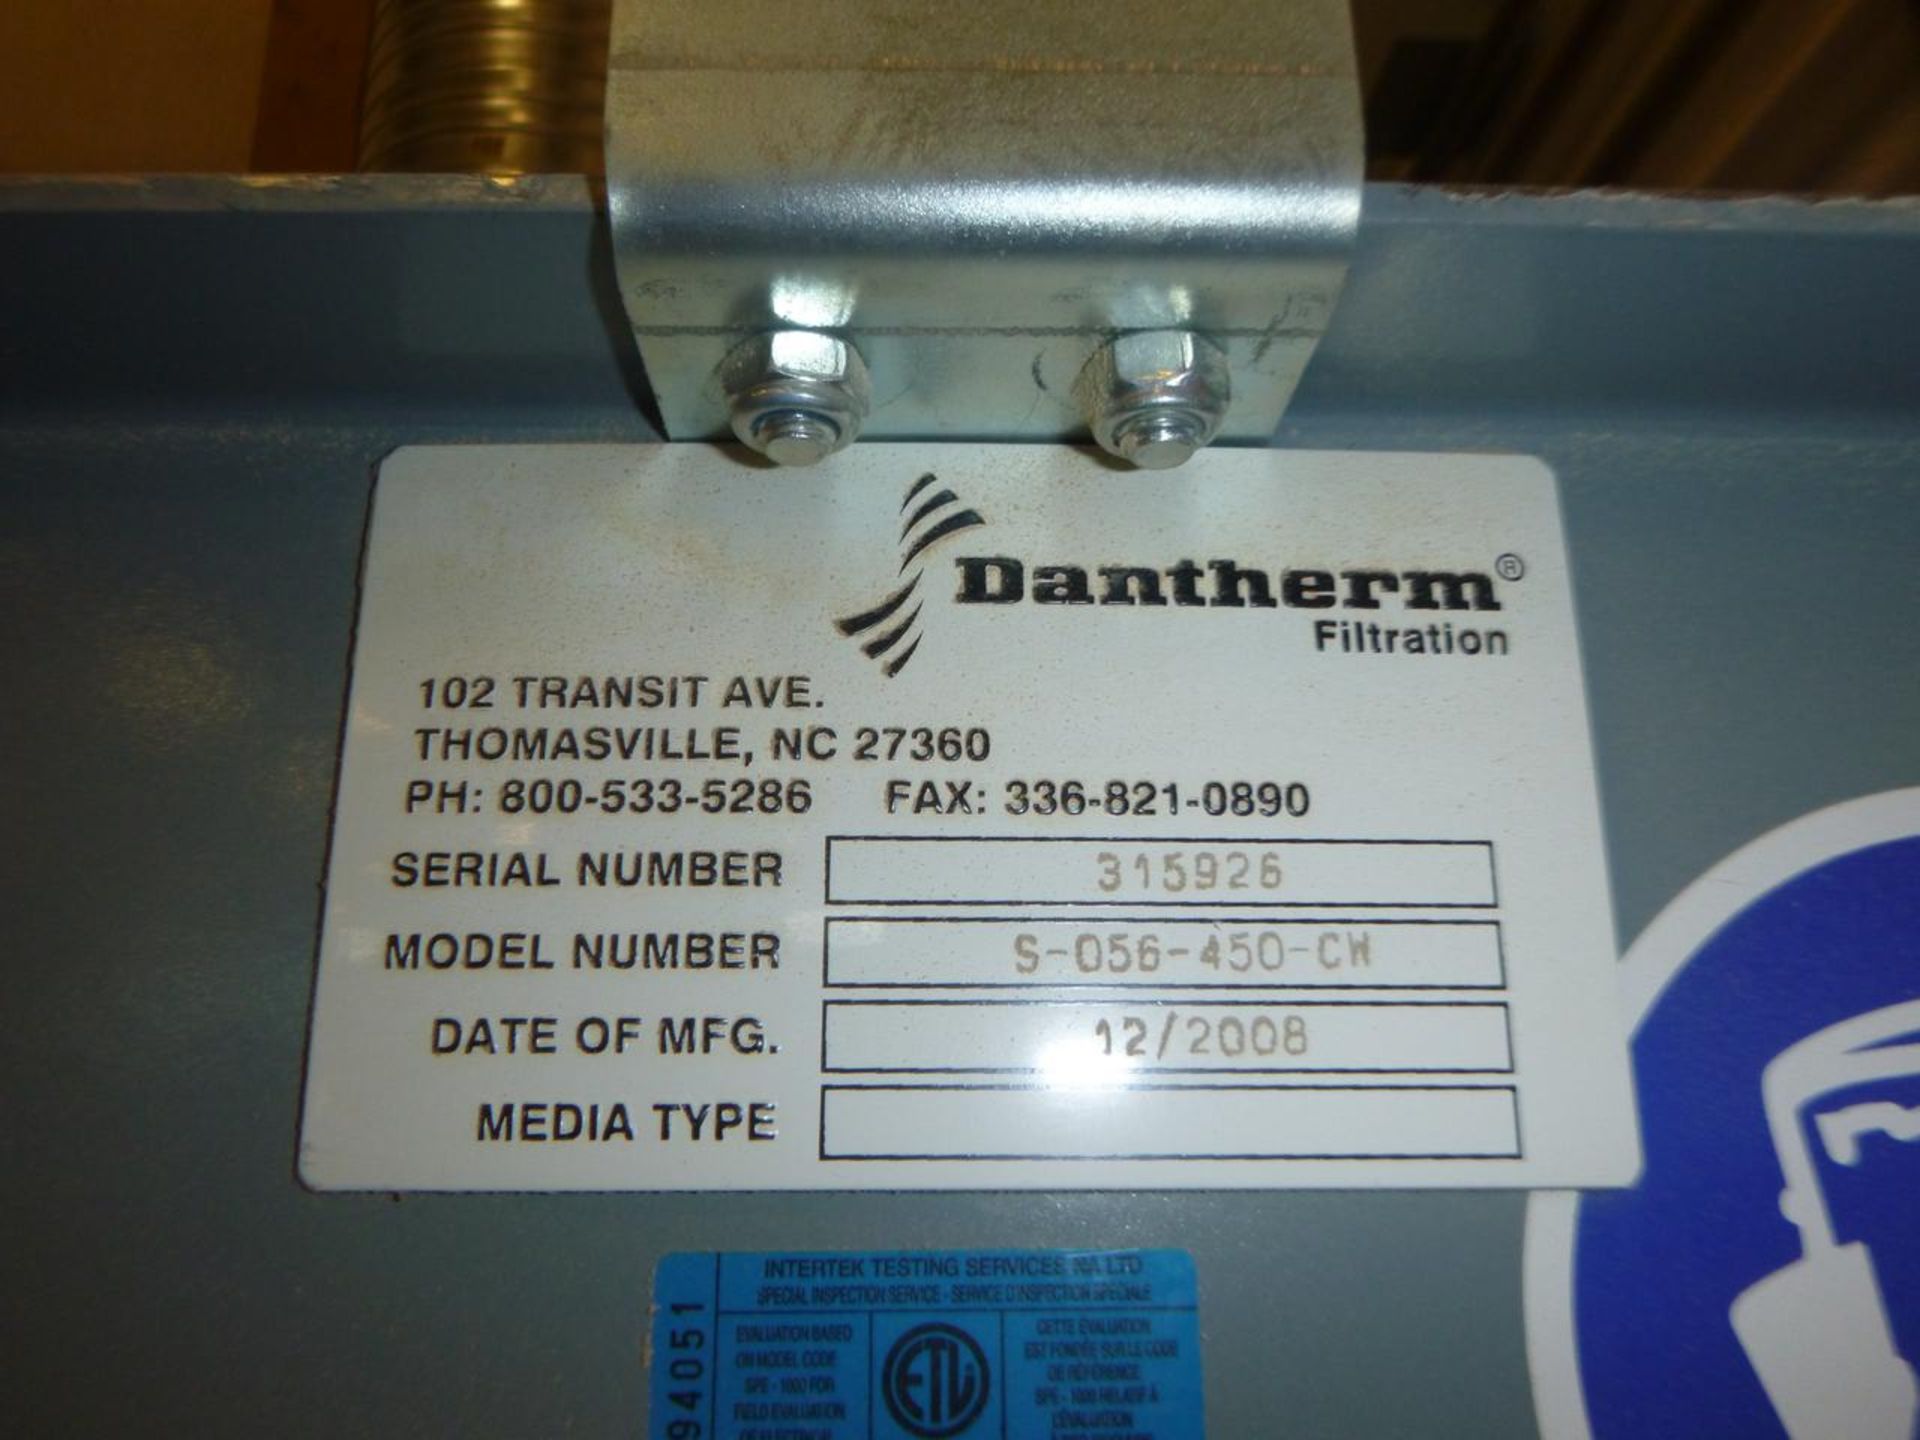 2009 Dantherm Filtration NFP-3H-OP Dust collection system - Image 5 of 5